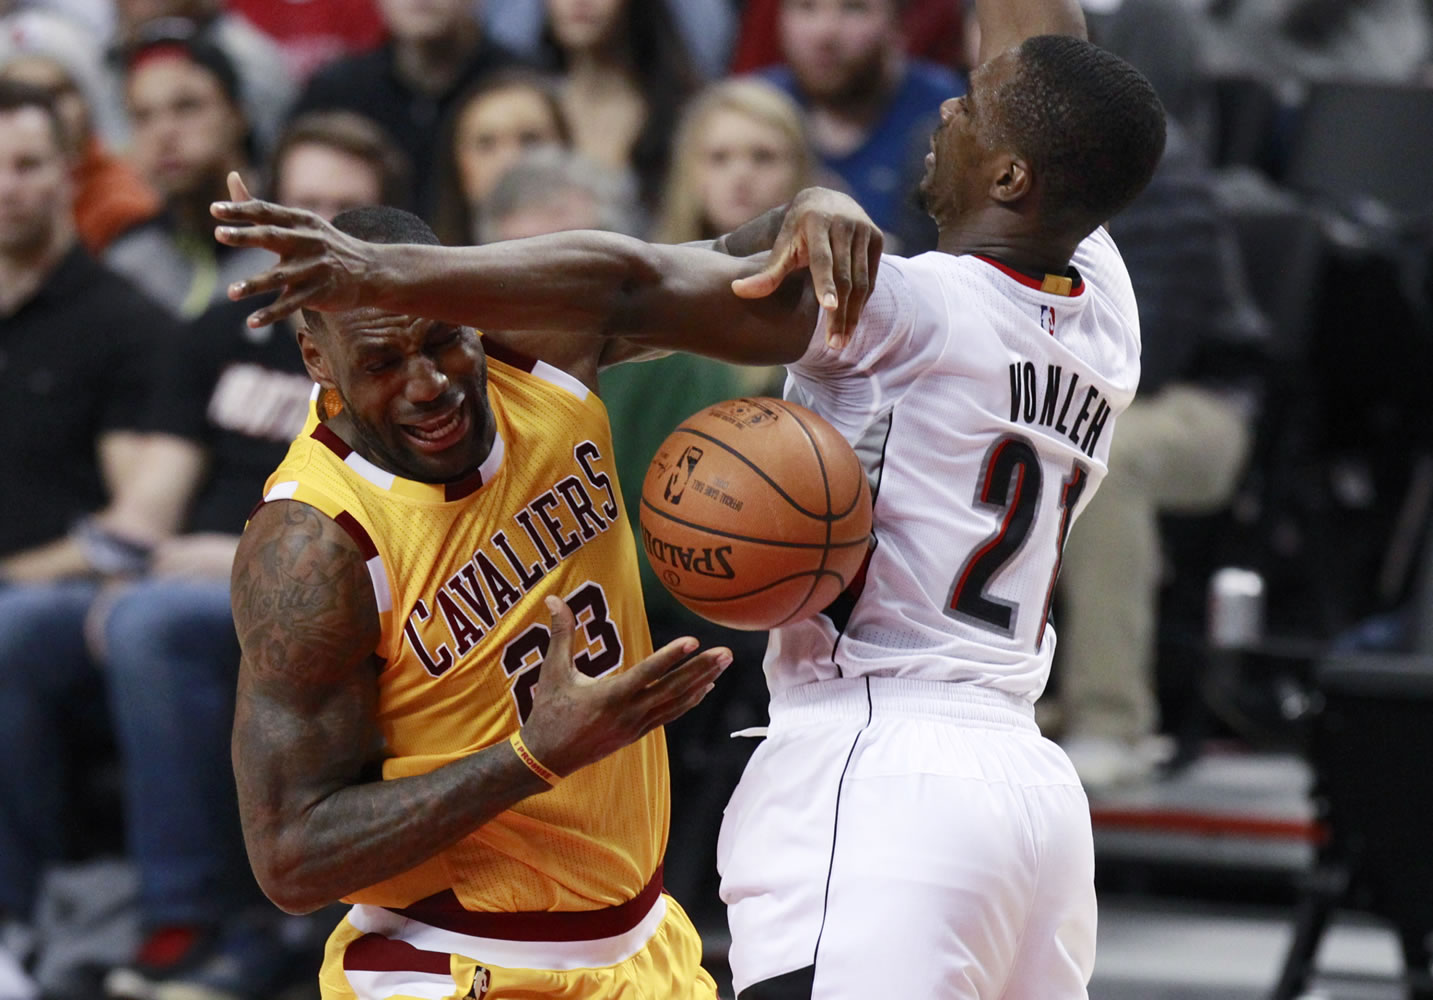 Portland Trail Blazers forward Noah Vonleh (right) knocks the ball away from Cleveland Cavaliers forward LeBron James during the second half of an NBA basketball game in Portland, Ore., Saturday, Dec. 26, 2015.